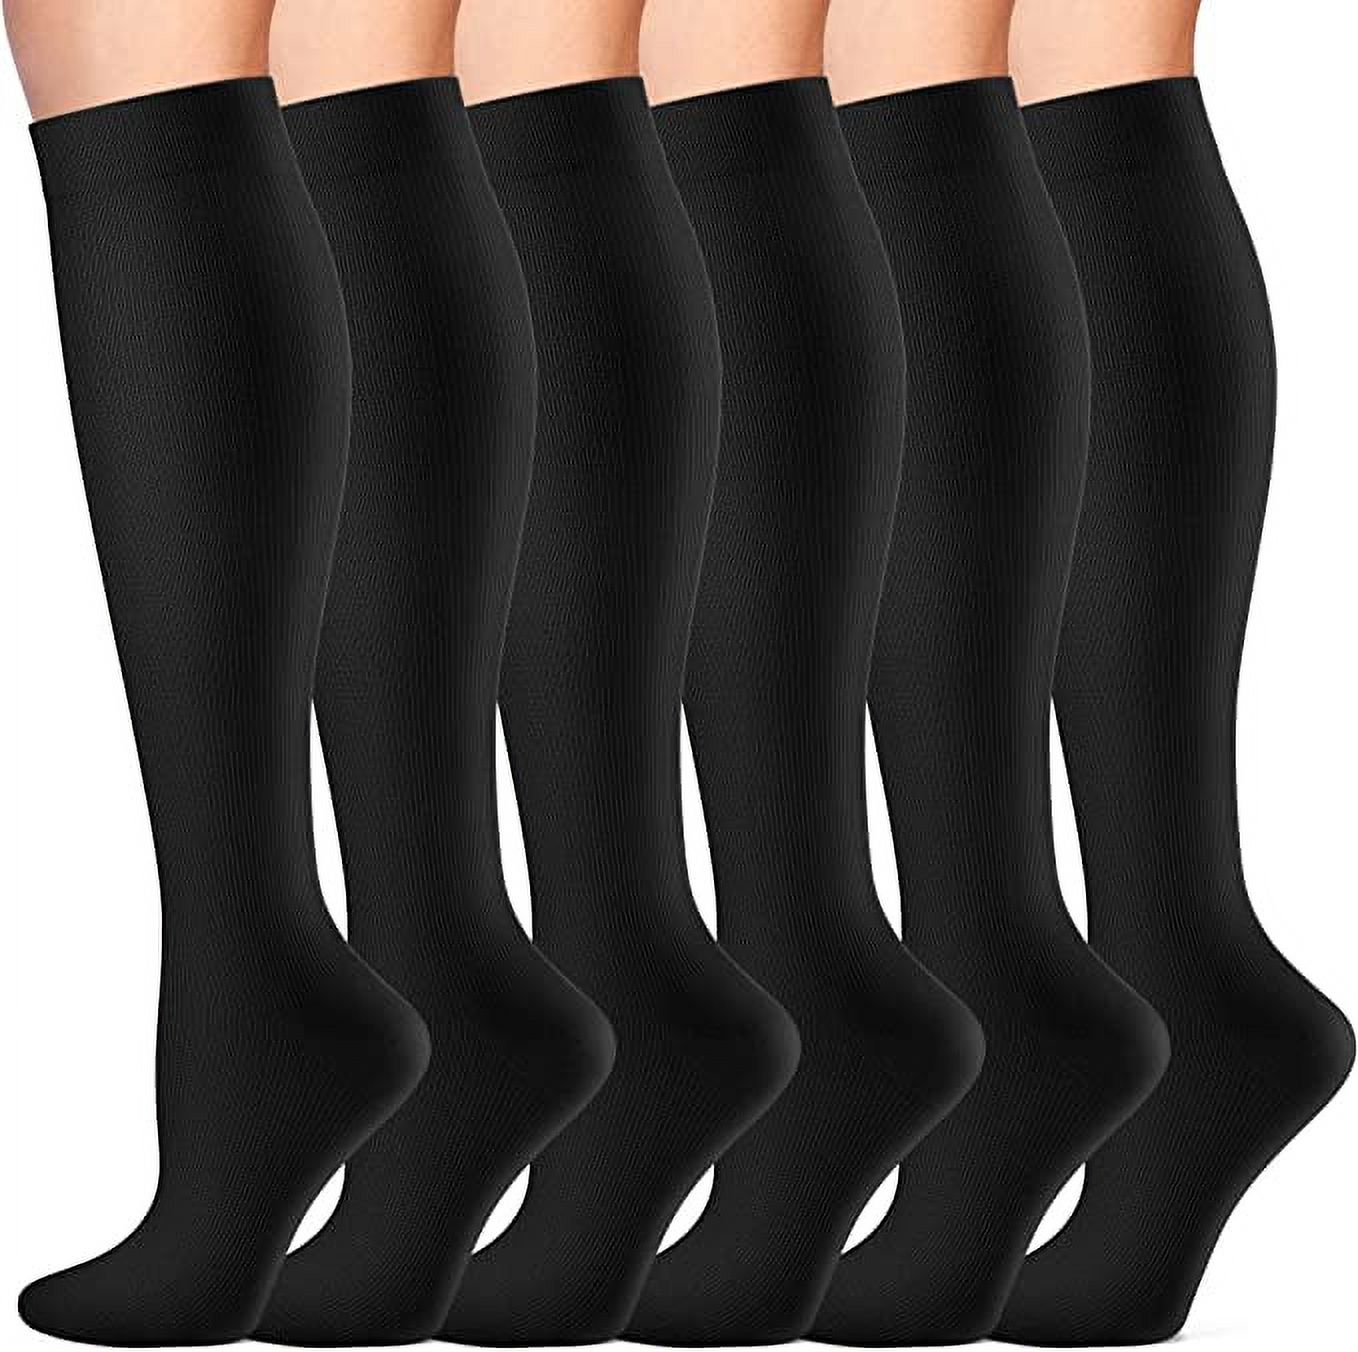 MediPeds Diabetic Supportive Compression Socks, Medium, 2 Pack ...